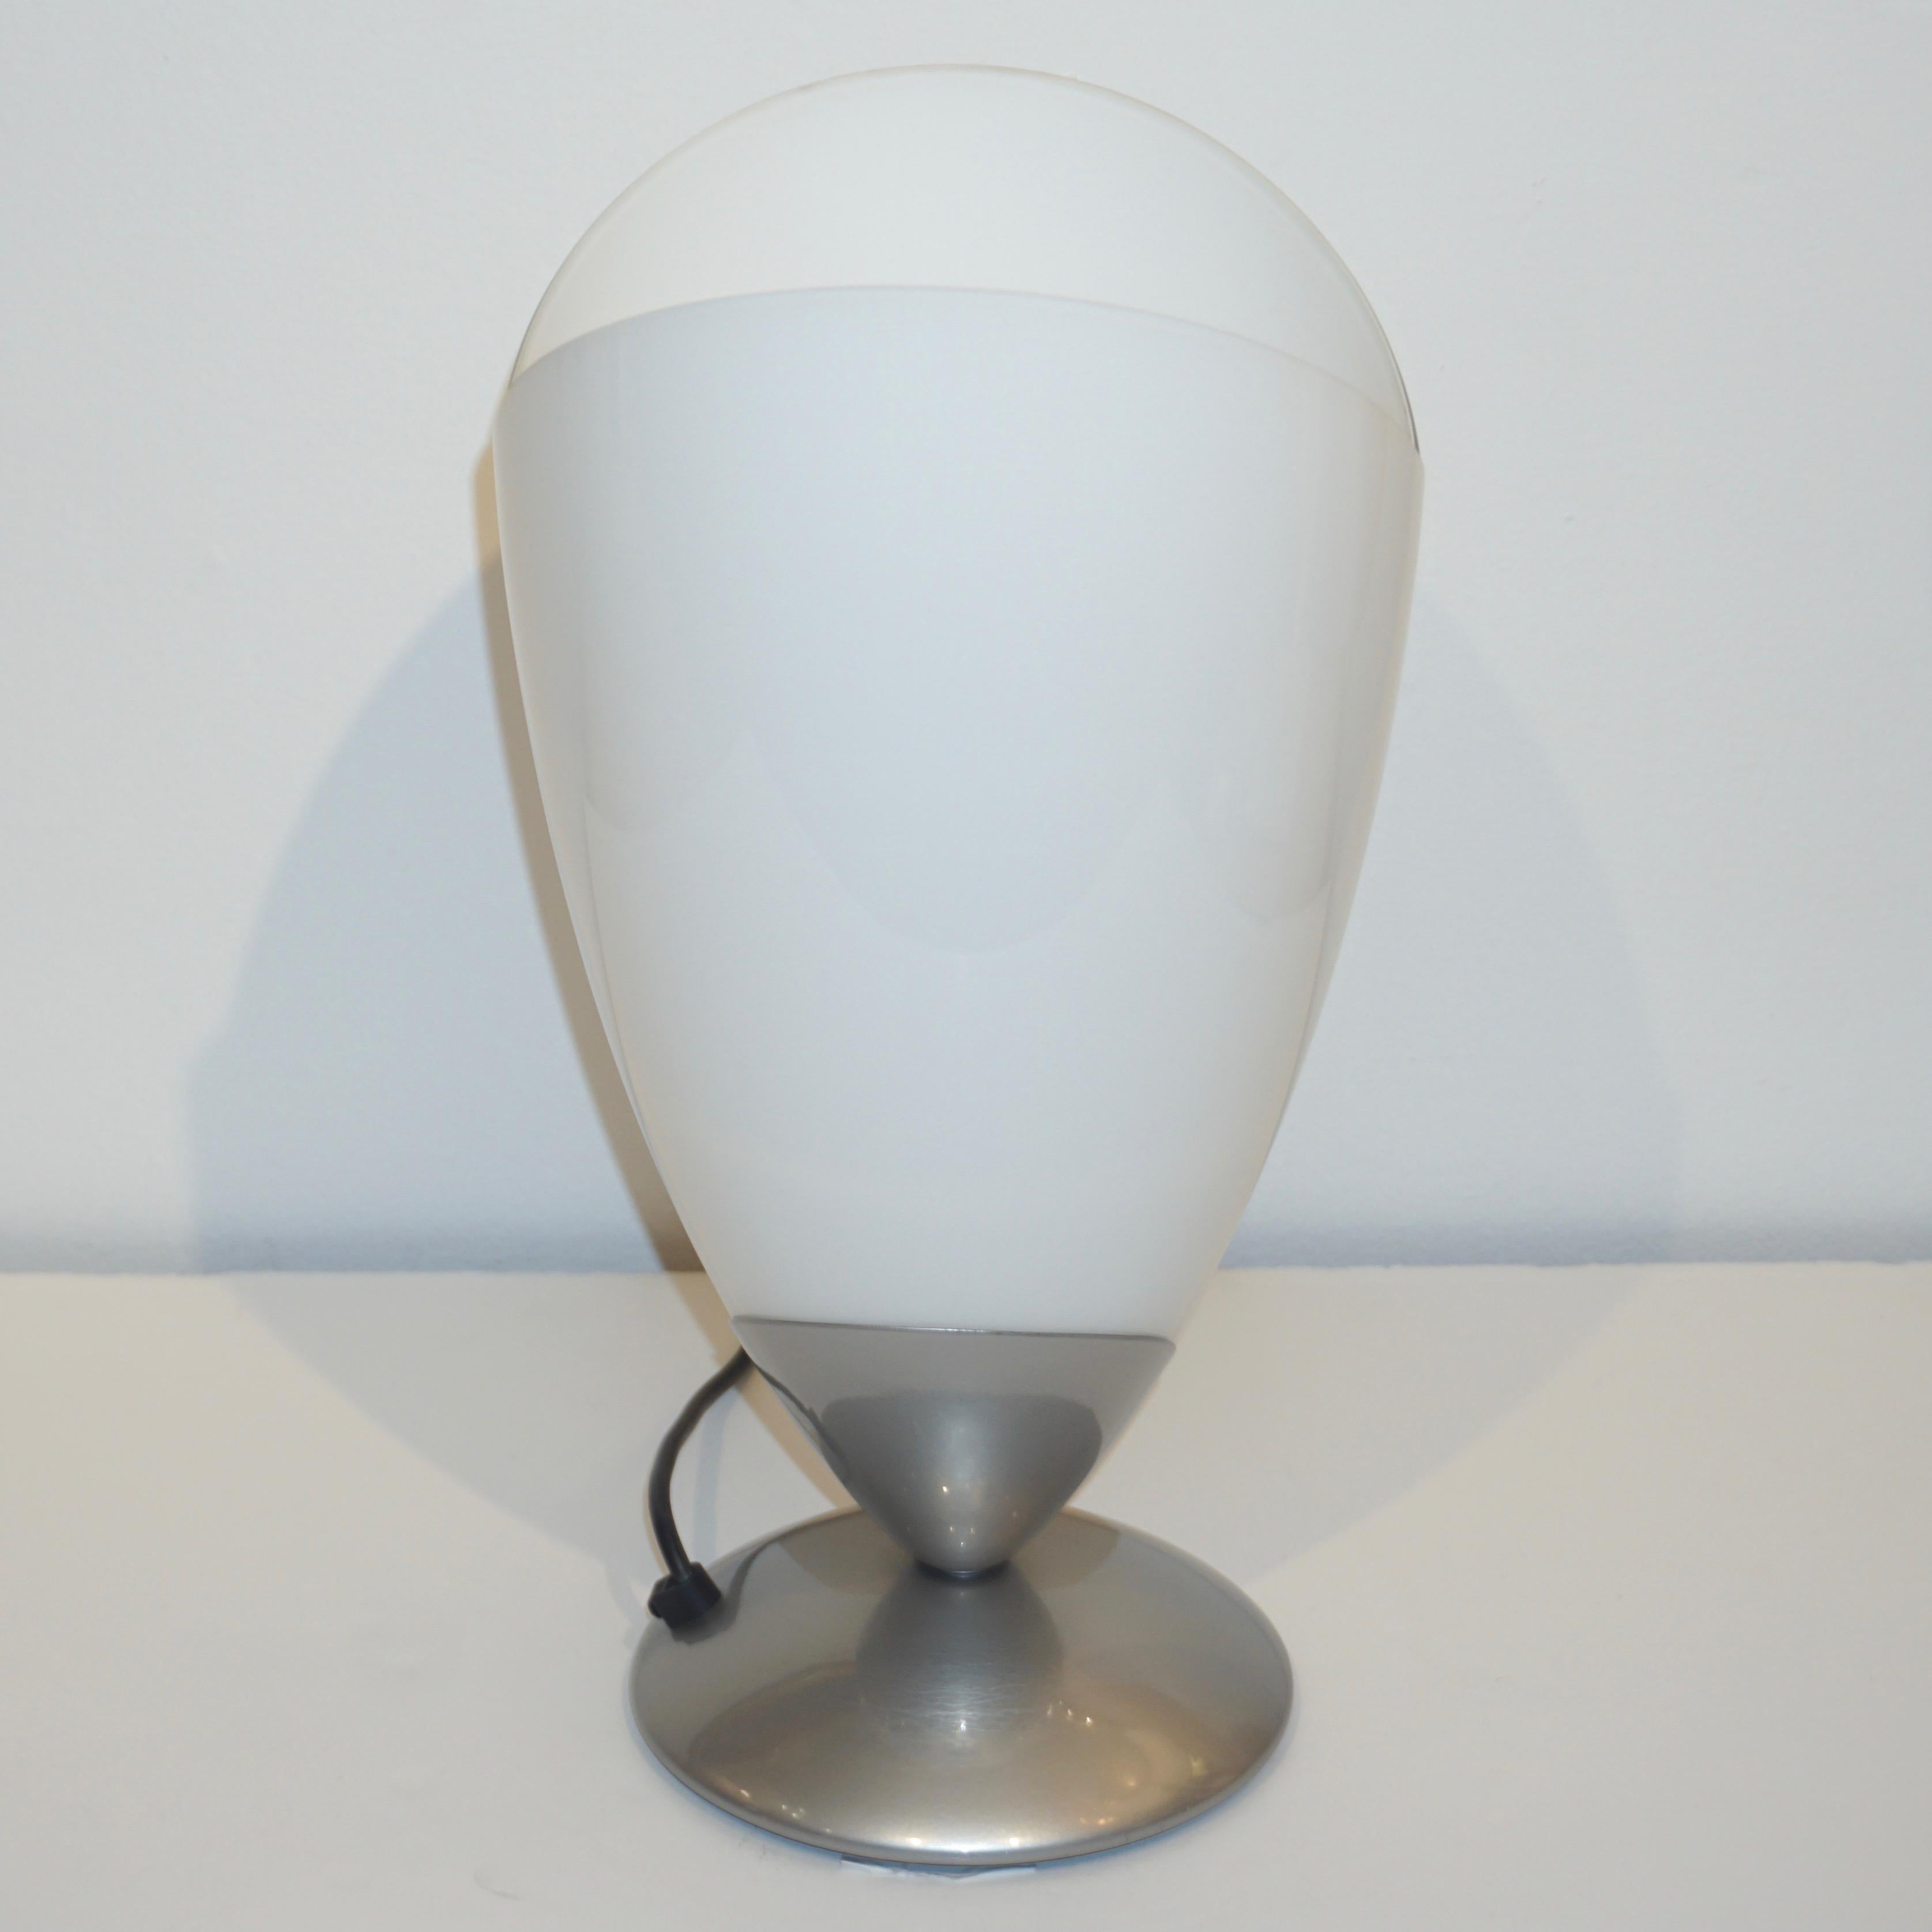 1970s Italian Pair of Satin Nickel & White Glass Organic Tulip Lamps by Tronconi For Sale 1